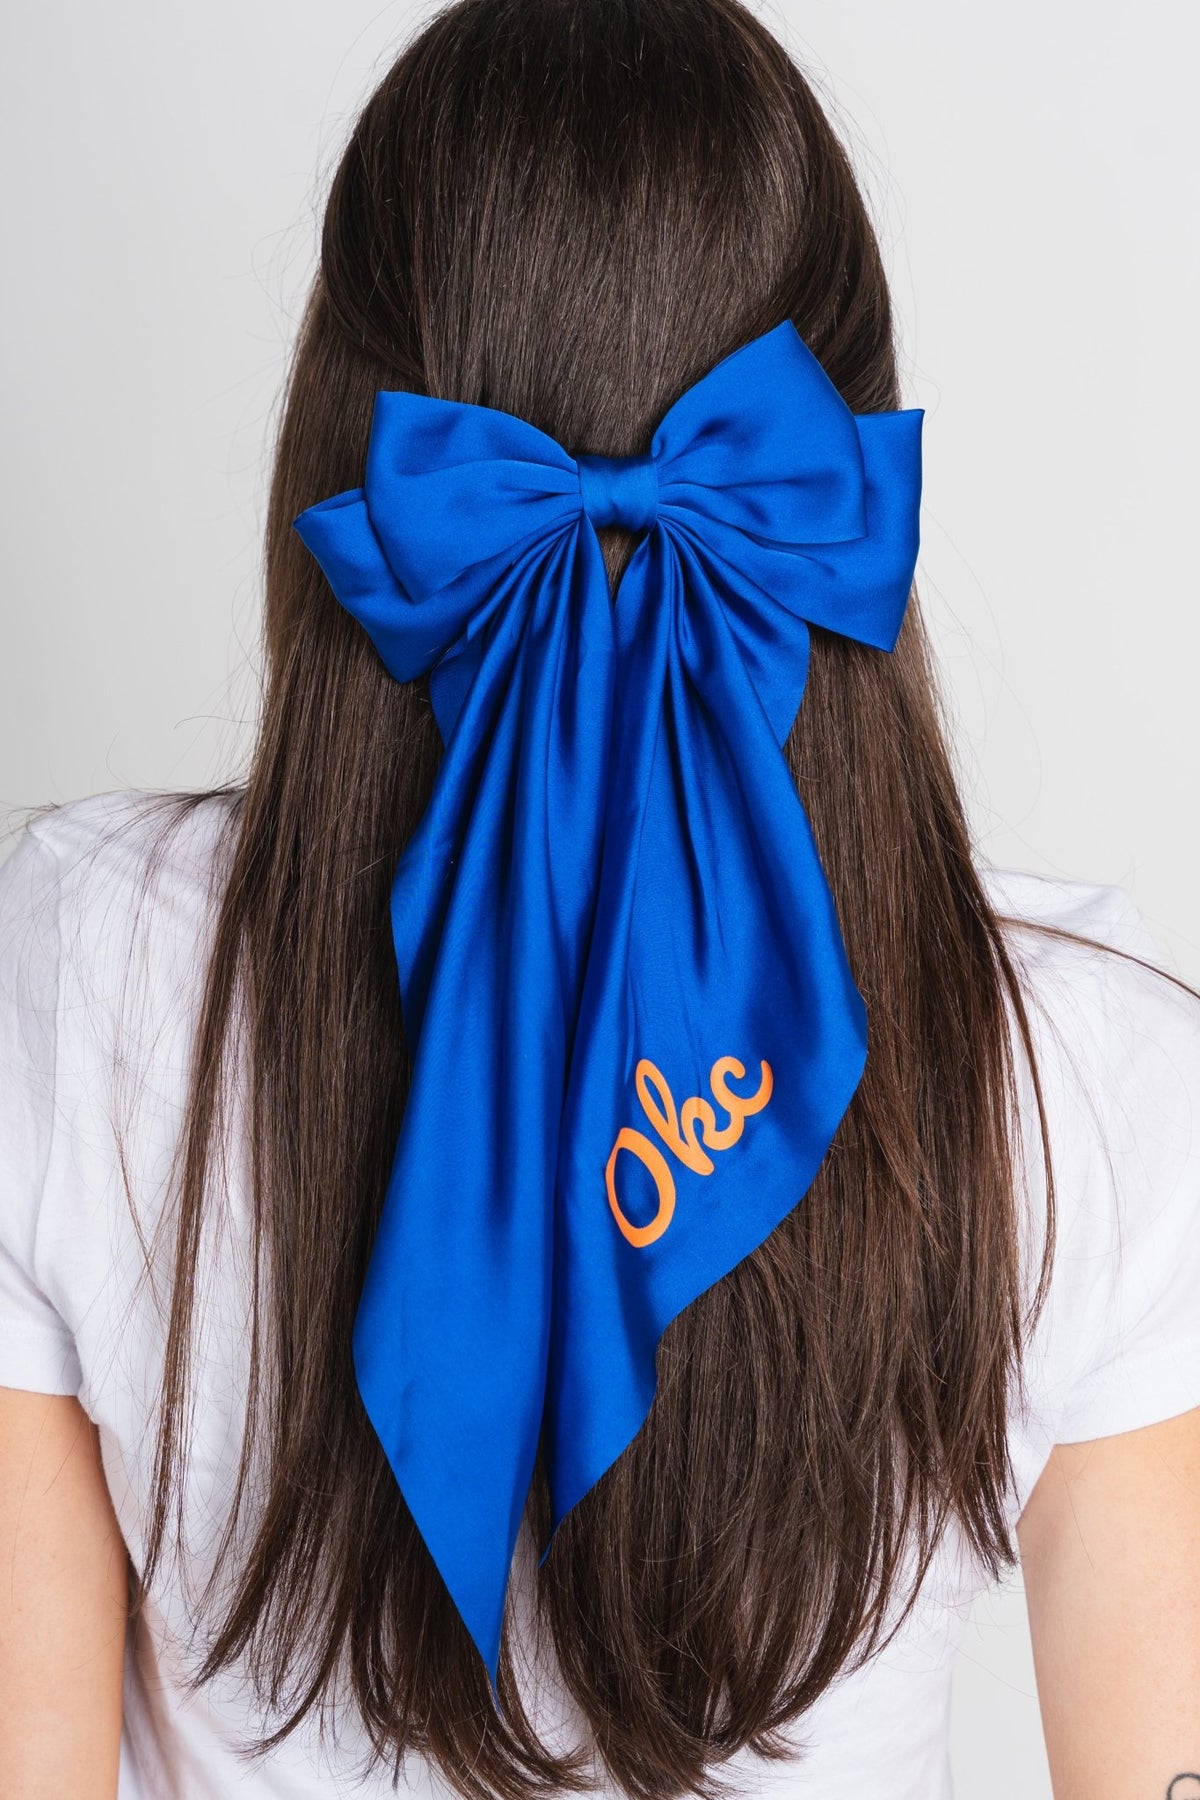 OKC game day hair bow royal - Trendy OKC Apparel at Lush Fashion Lounge Boutique in Oklahoma City